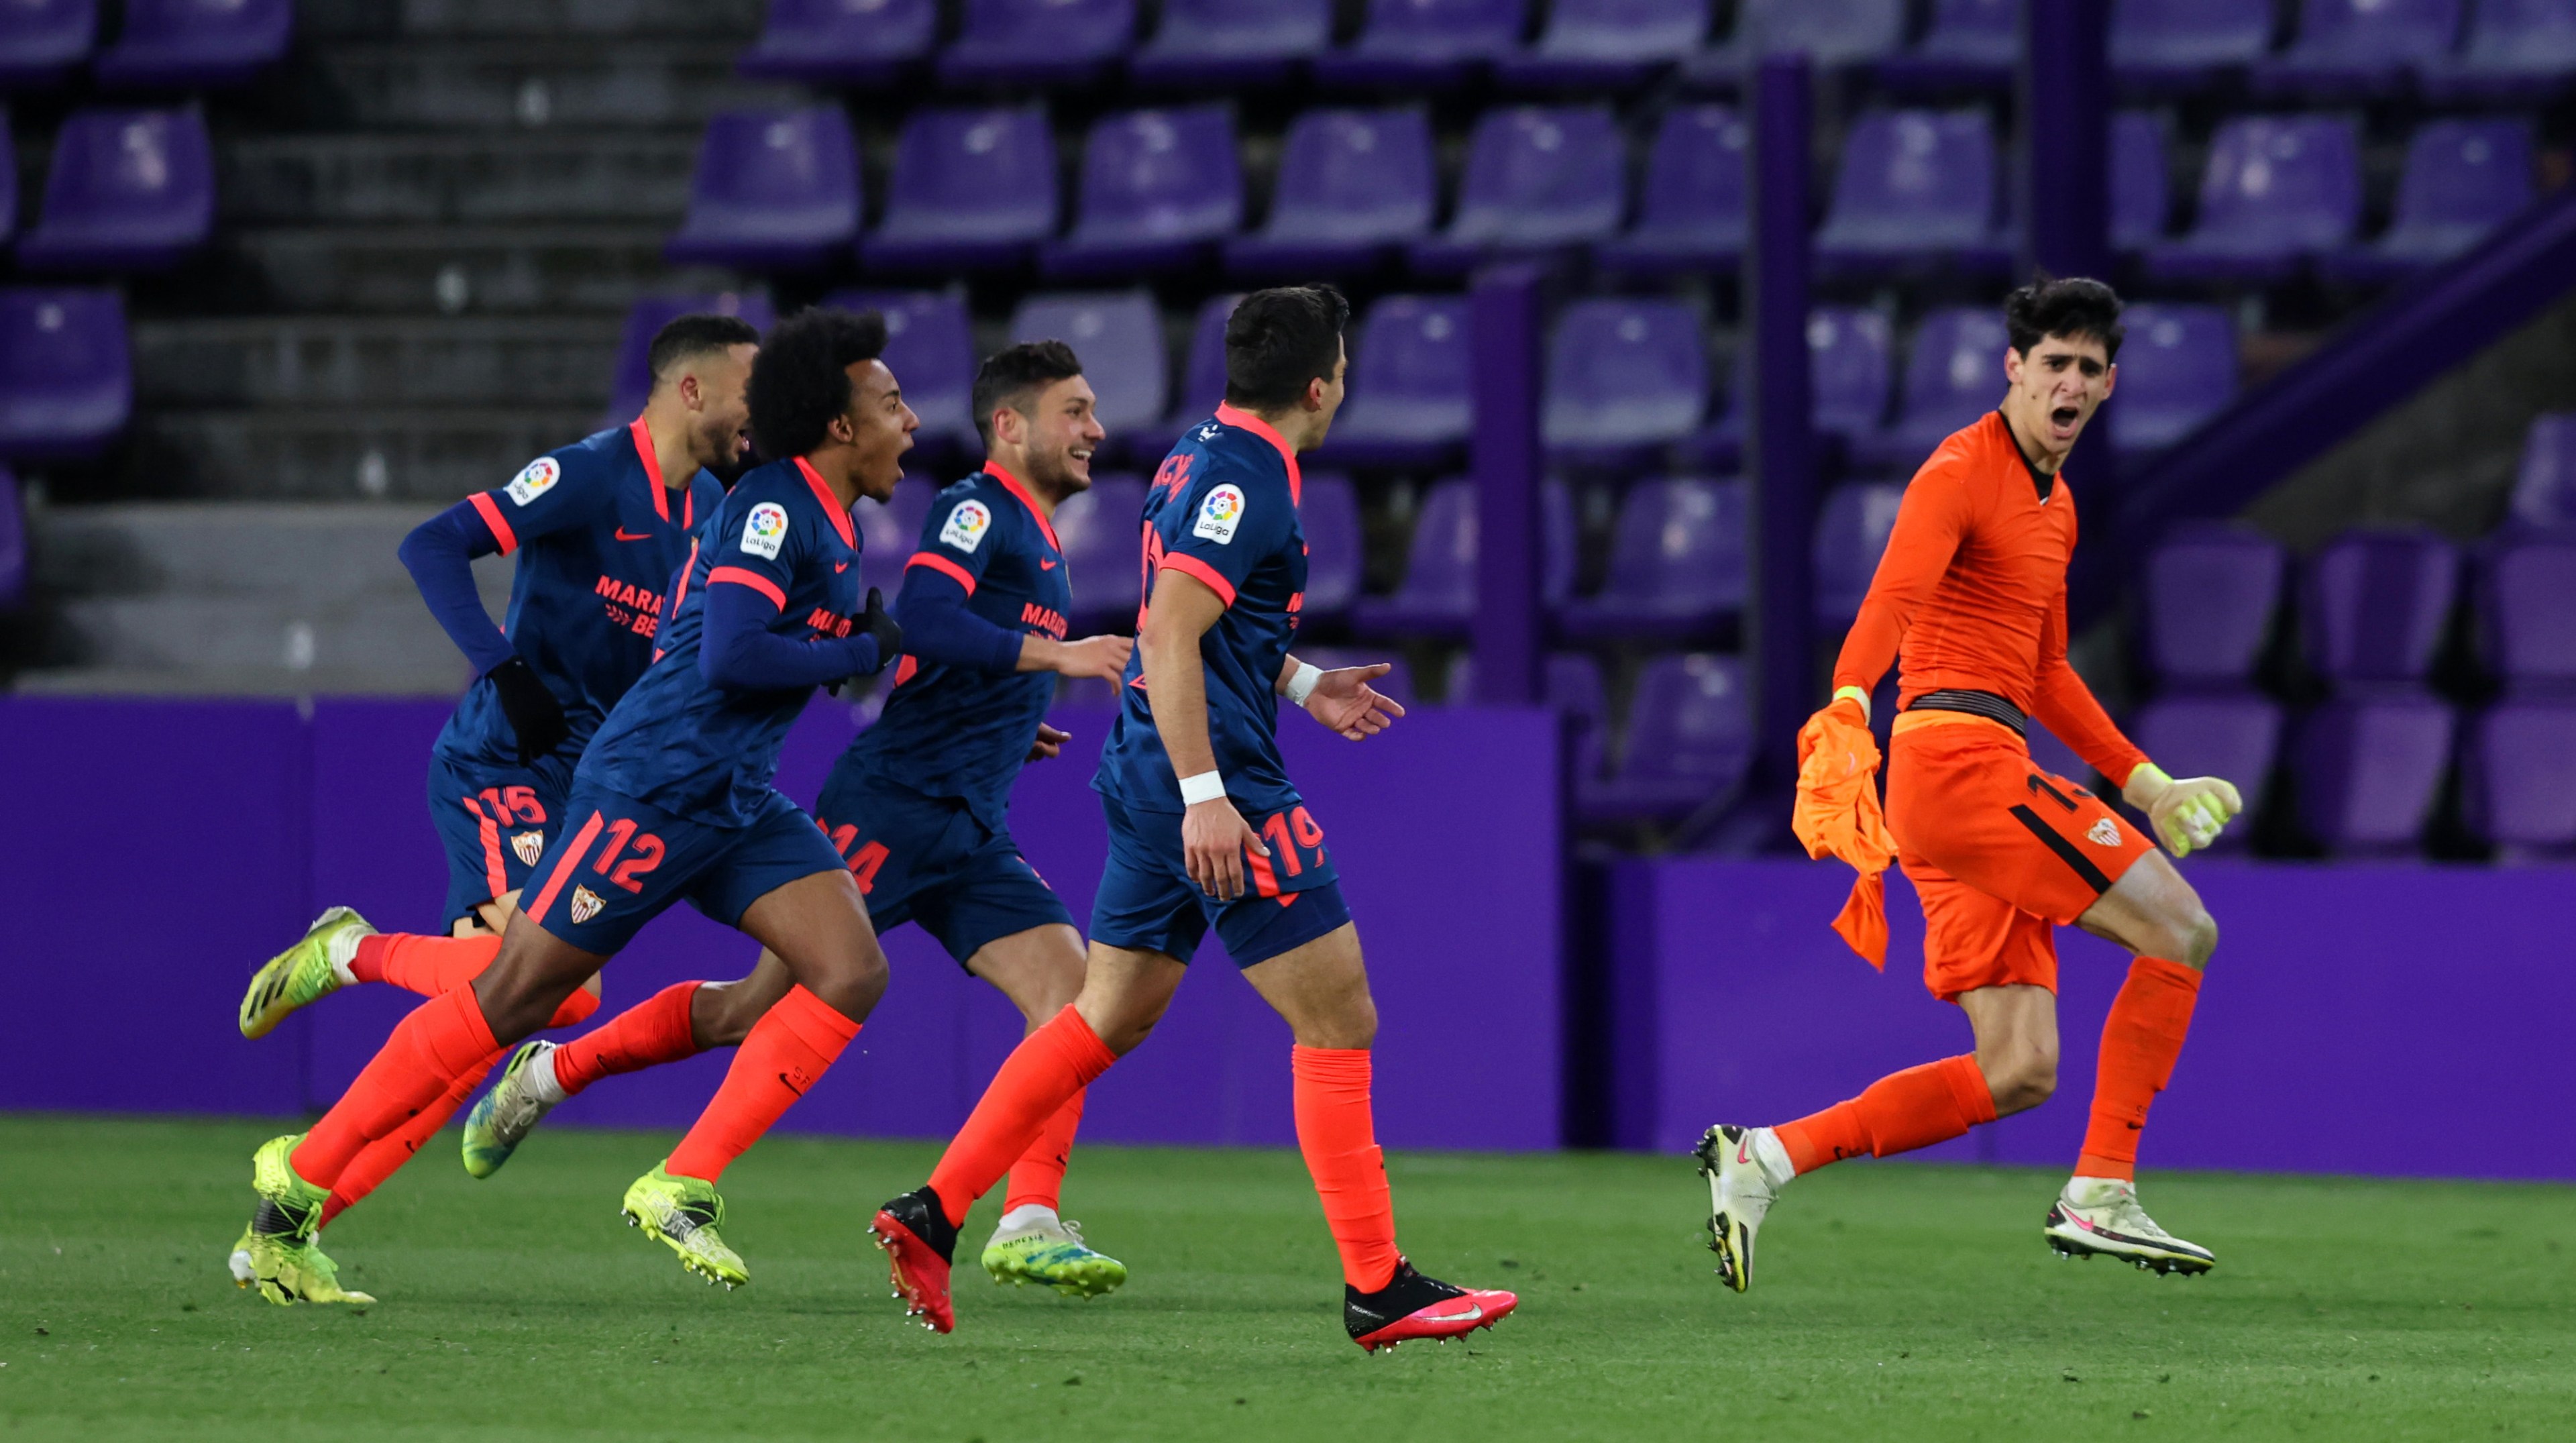 Yassine Bounou of Sevilla FC celebrates with teammates after scoring their team's first goal during the La Liga Santander match between Real Valladolid CF and Sevilla FC at Estadio Municipal Jose Zorrilla on March 20, 2021 in Valladolid, Spain.